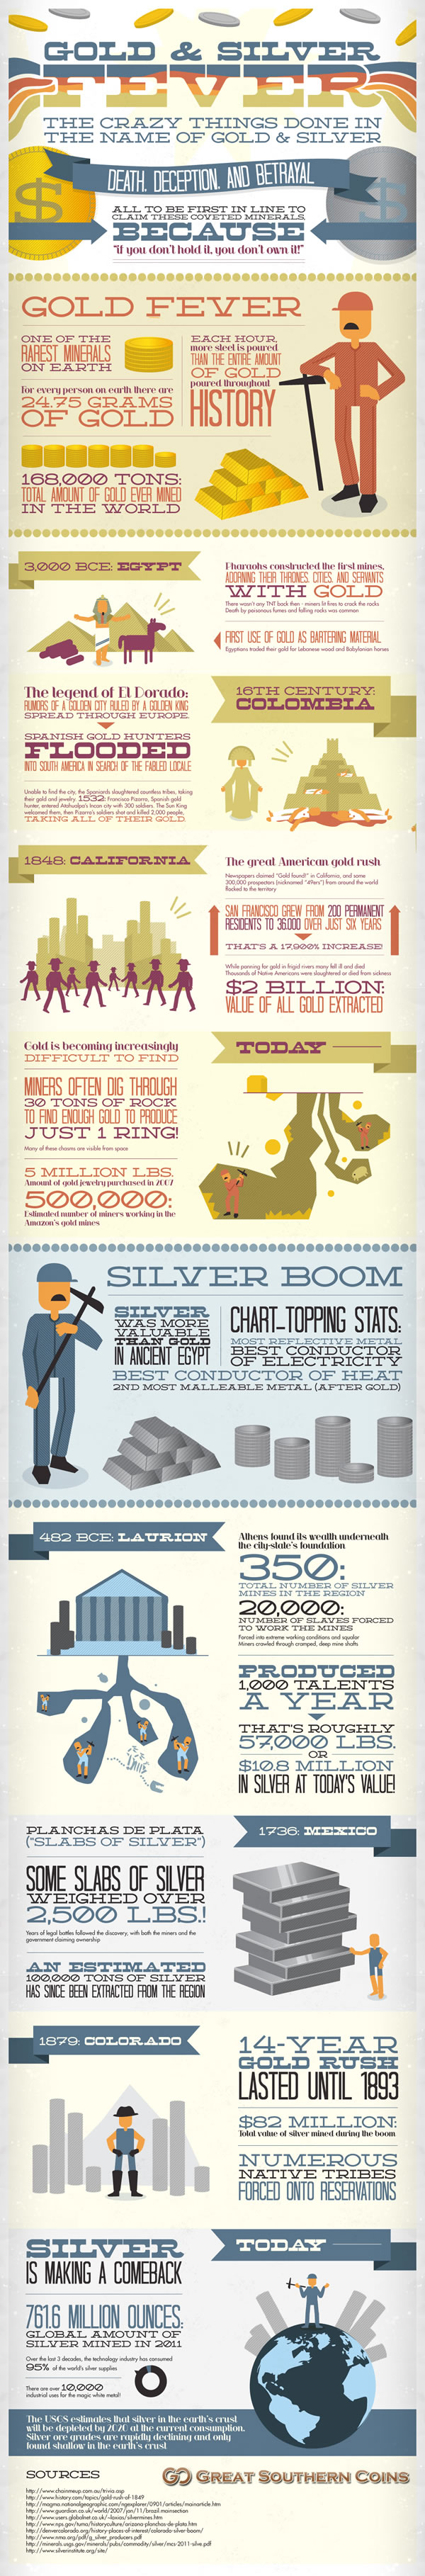 Gold and Silver Fever